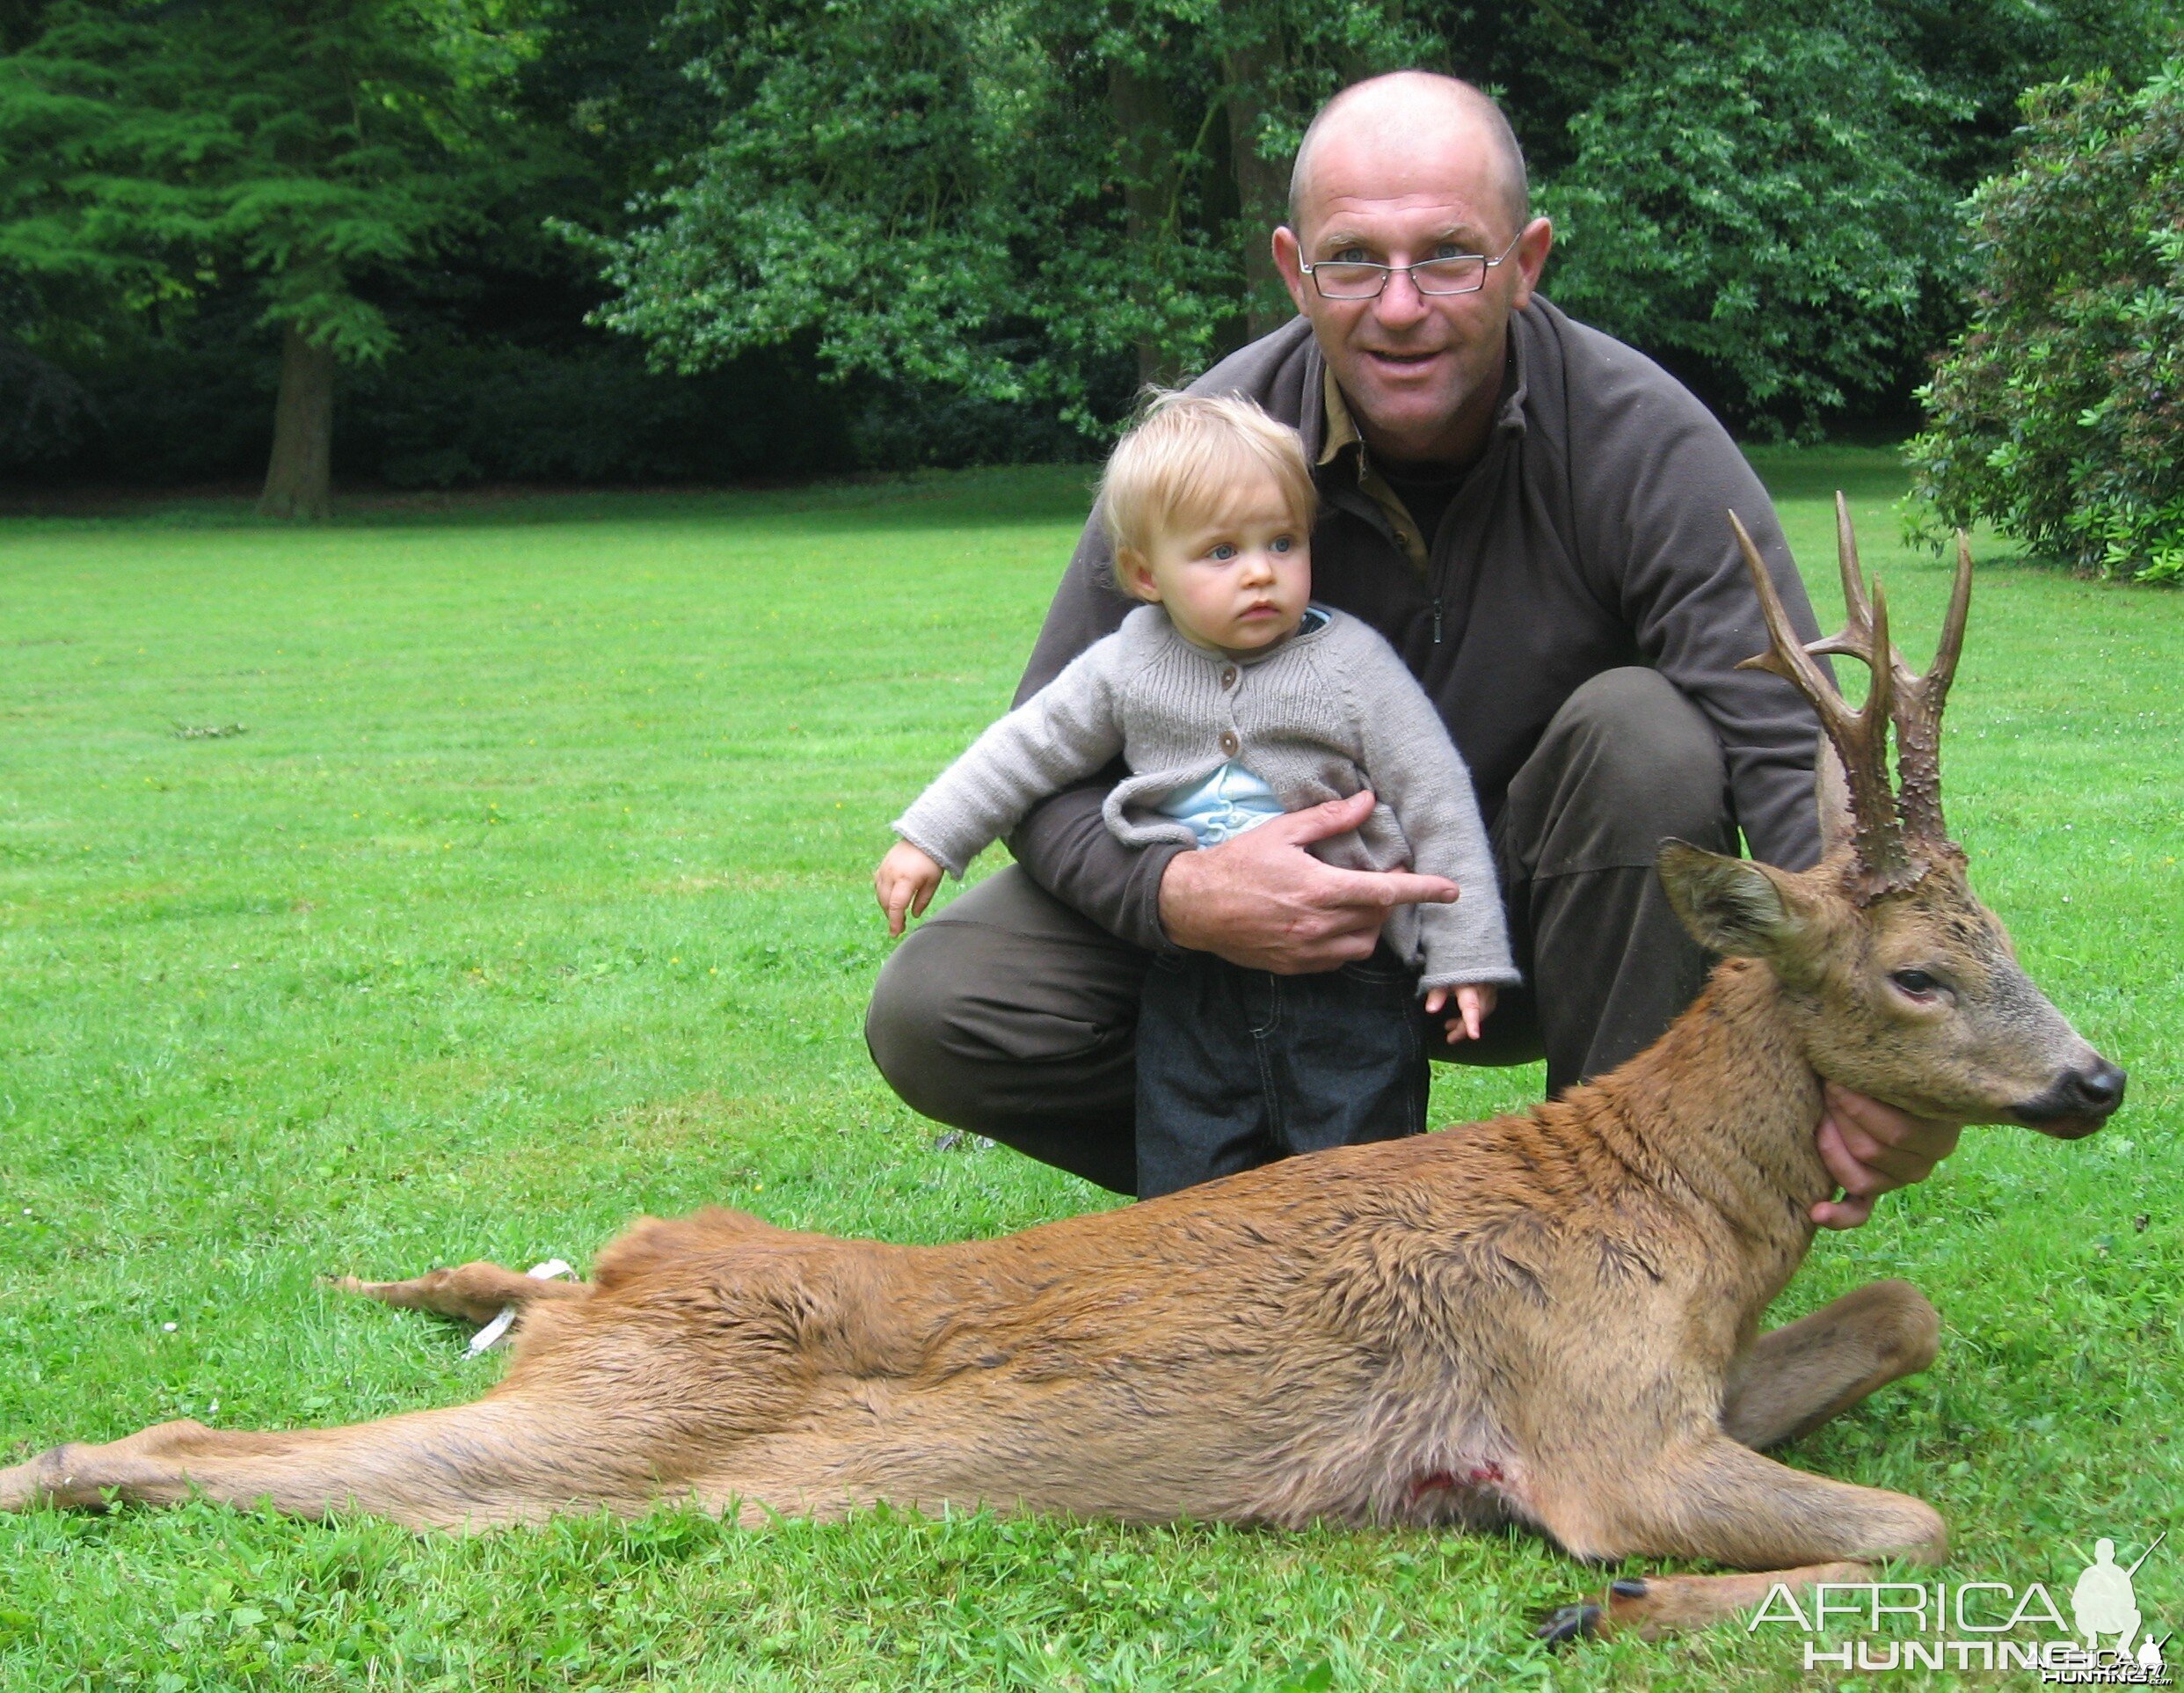 Big roe deer on my first father's day